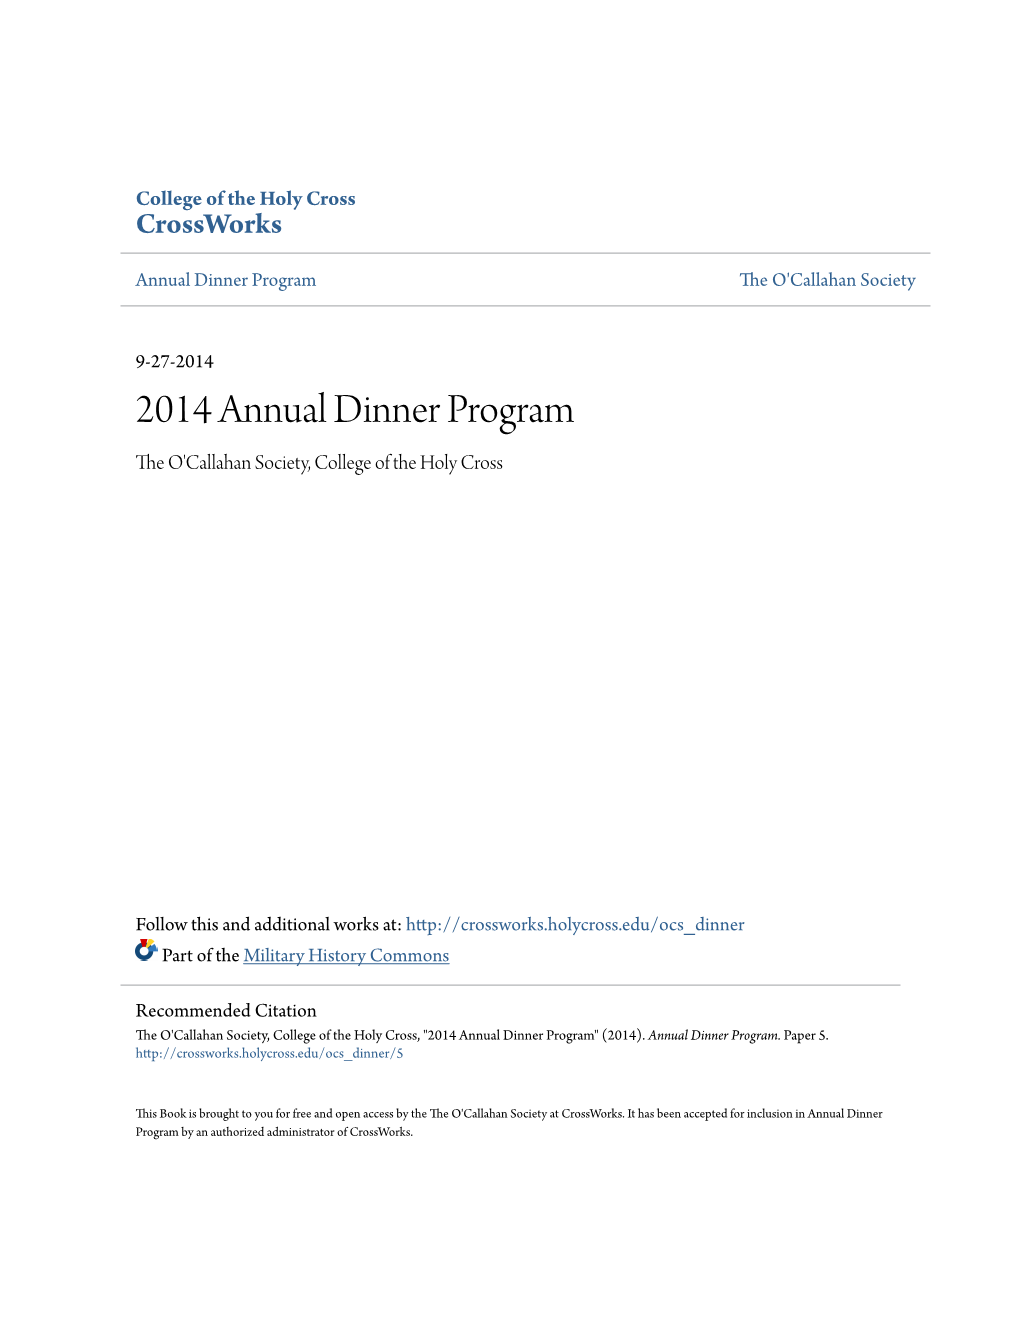 2014 Annual Dinner Program the 'Ocallahan Society, College of the Holy Cross